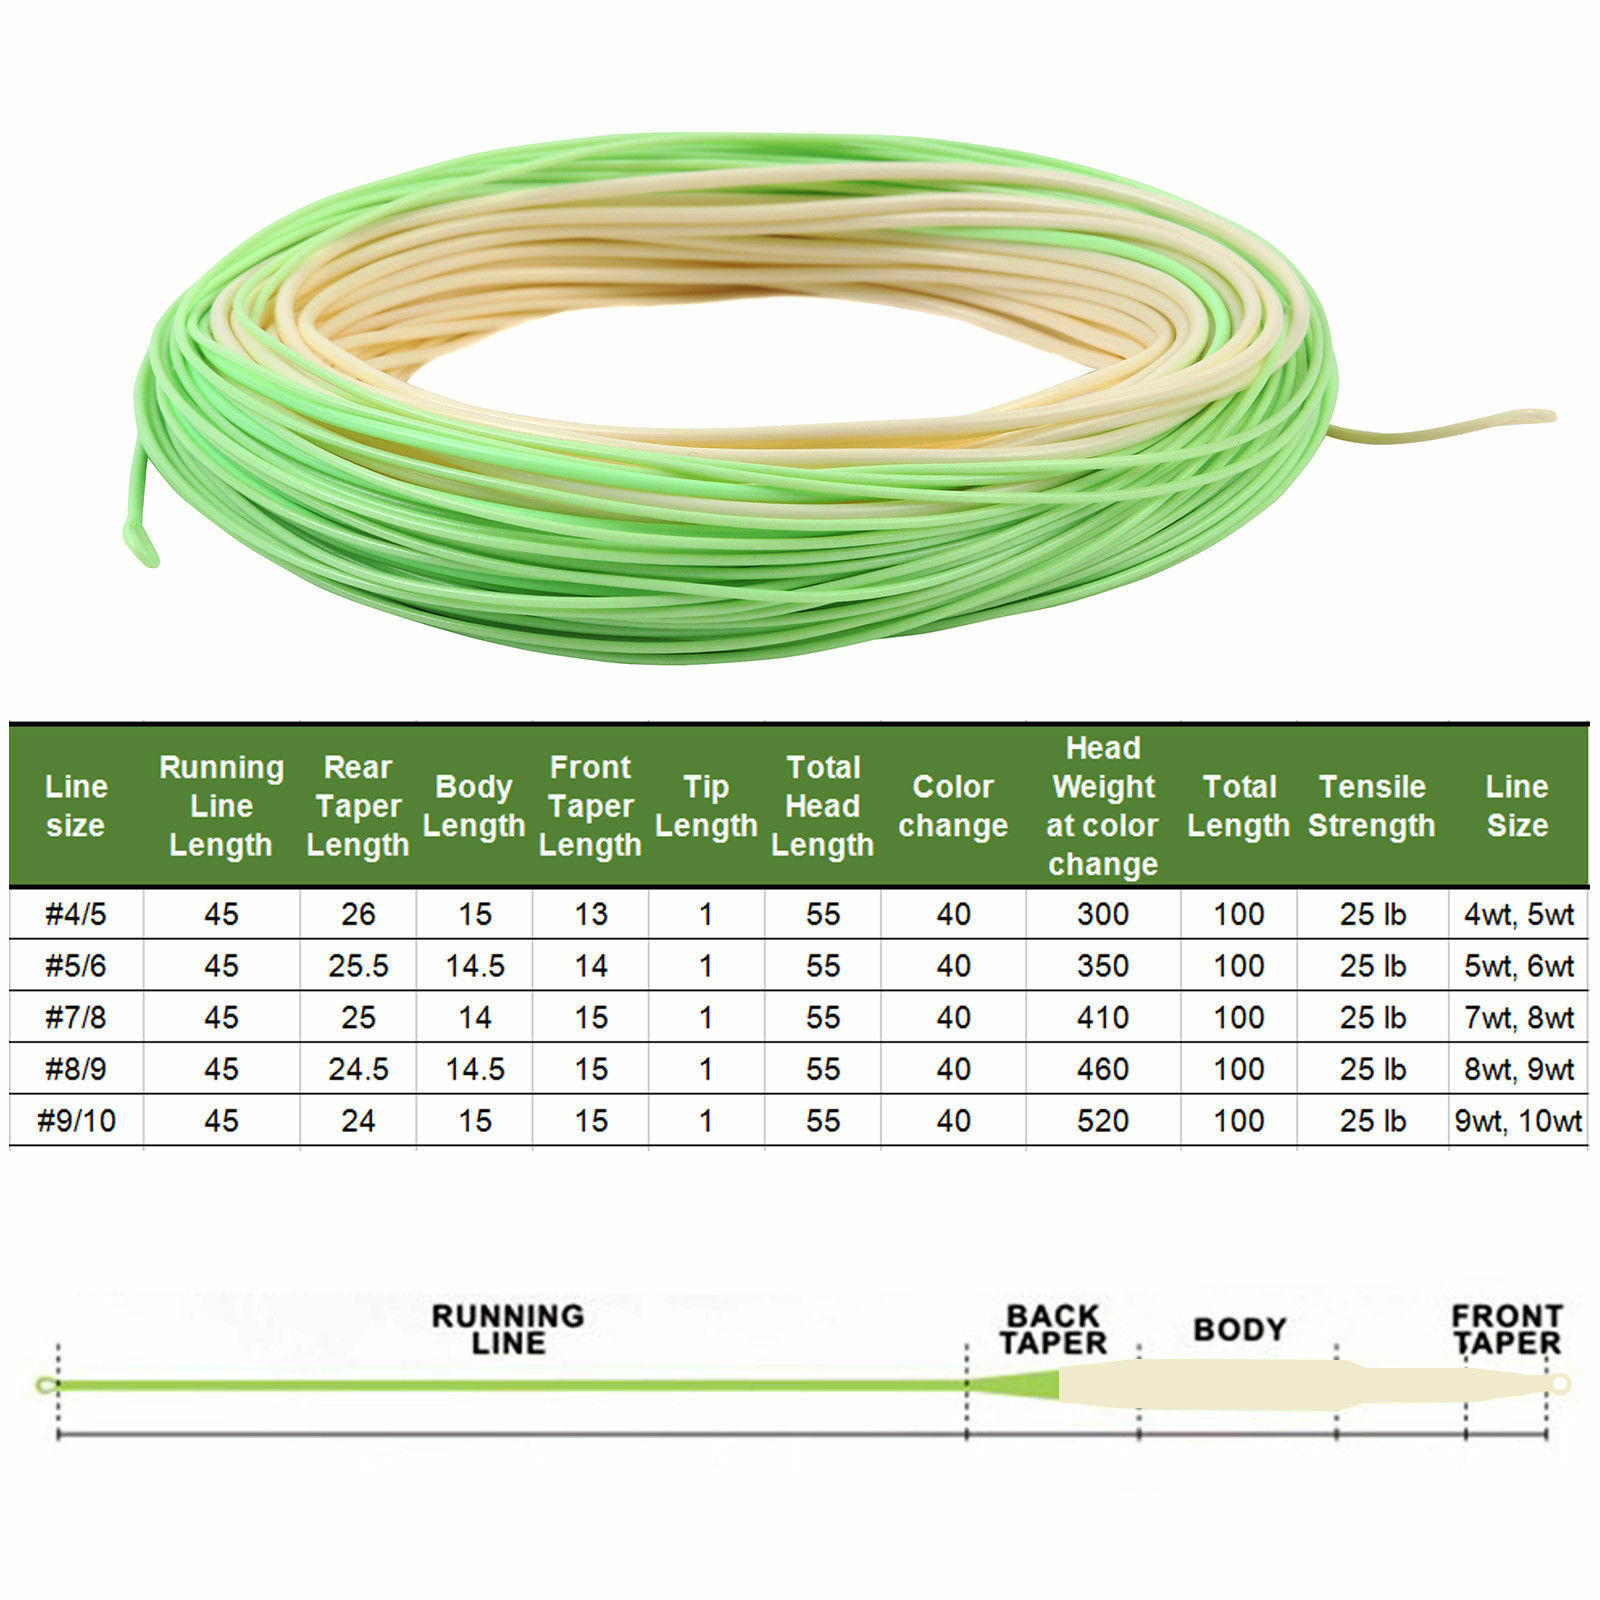 4wt-8wt Floating 2 welded loops Switch Fly Line for Switch Rods 100ft